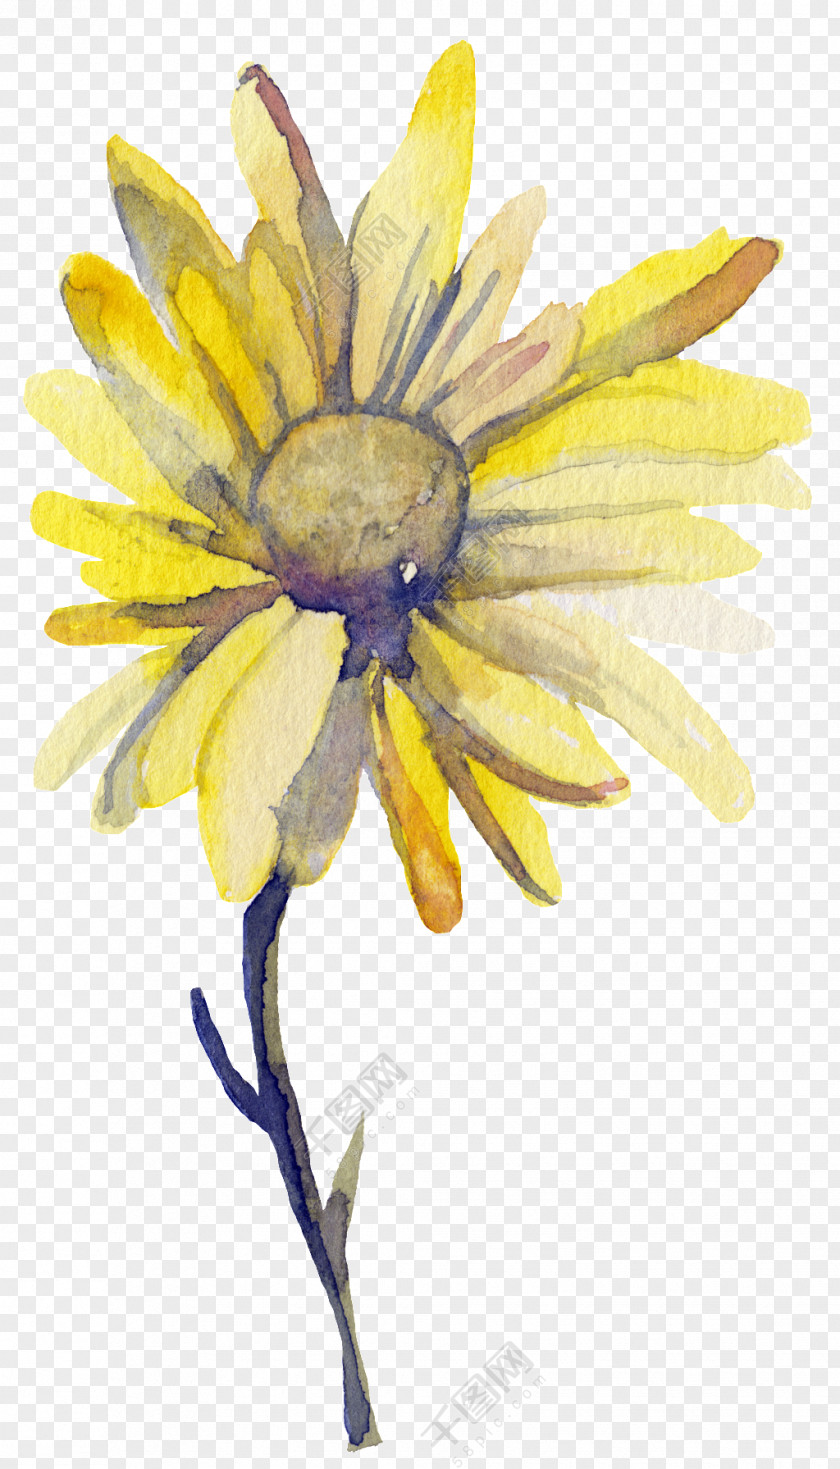 Yellow Sun Watercolor: Flowers Watercolor Painting Image Illustration PNG